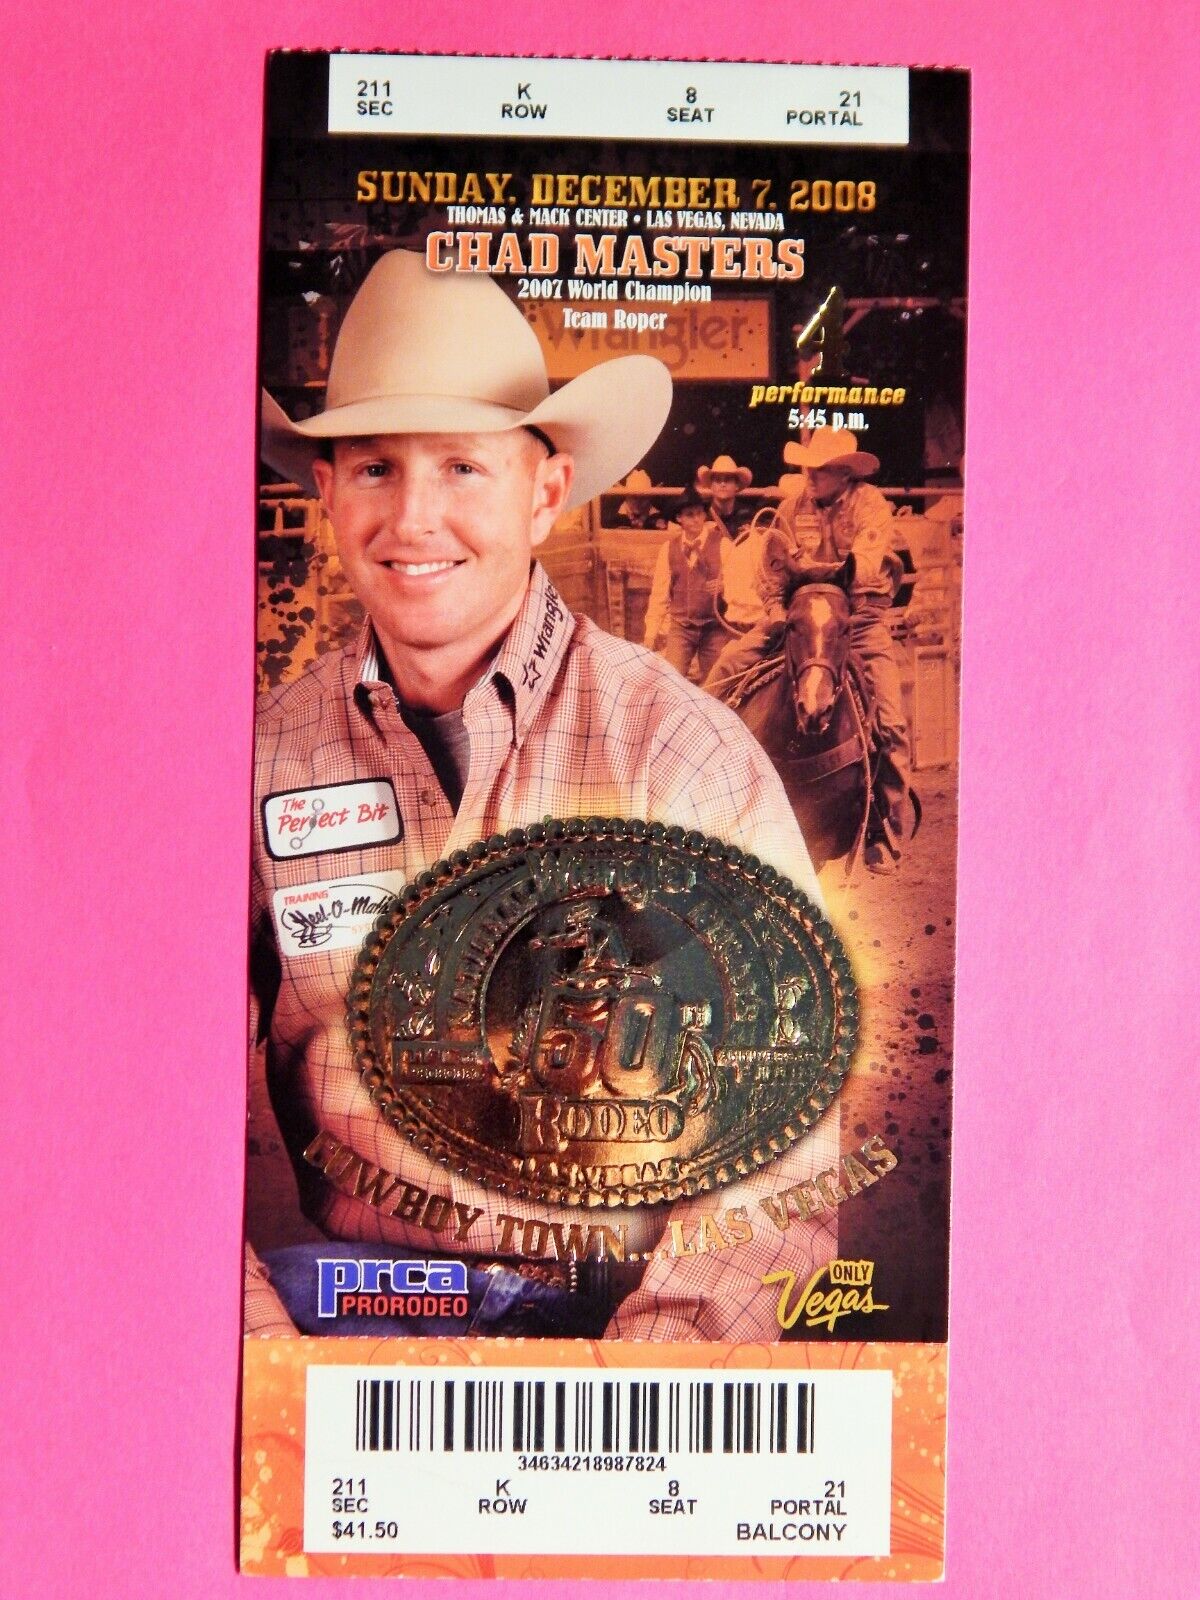 2008 NATIONAL FINALS RODEO LG ORIGINAL USED TICKET CHAD MASTERS COLOR Photo Poster painting